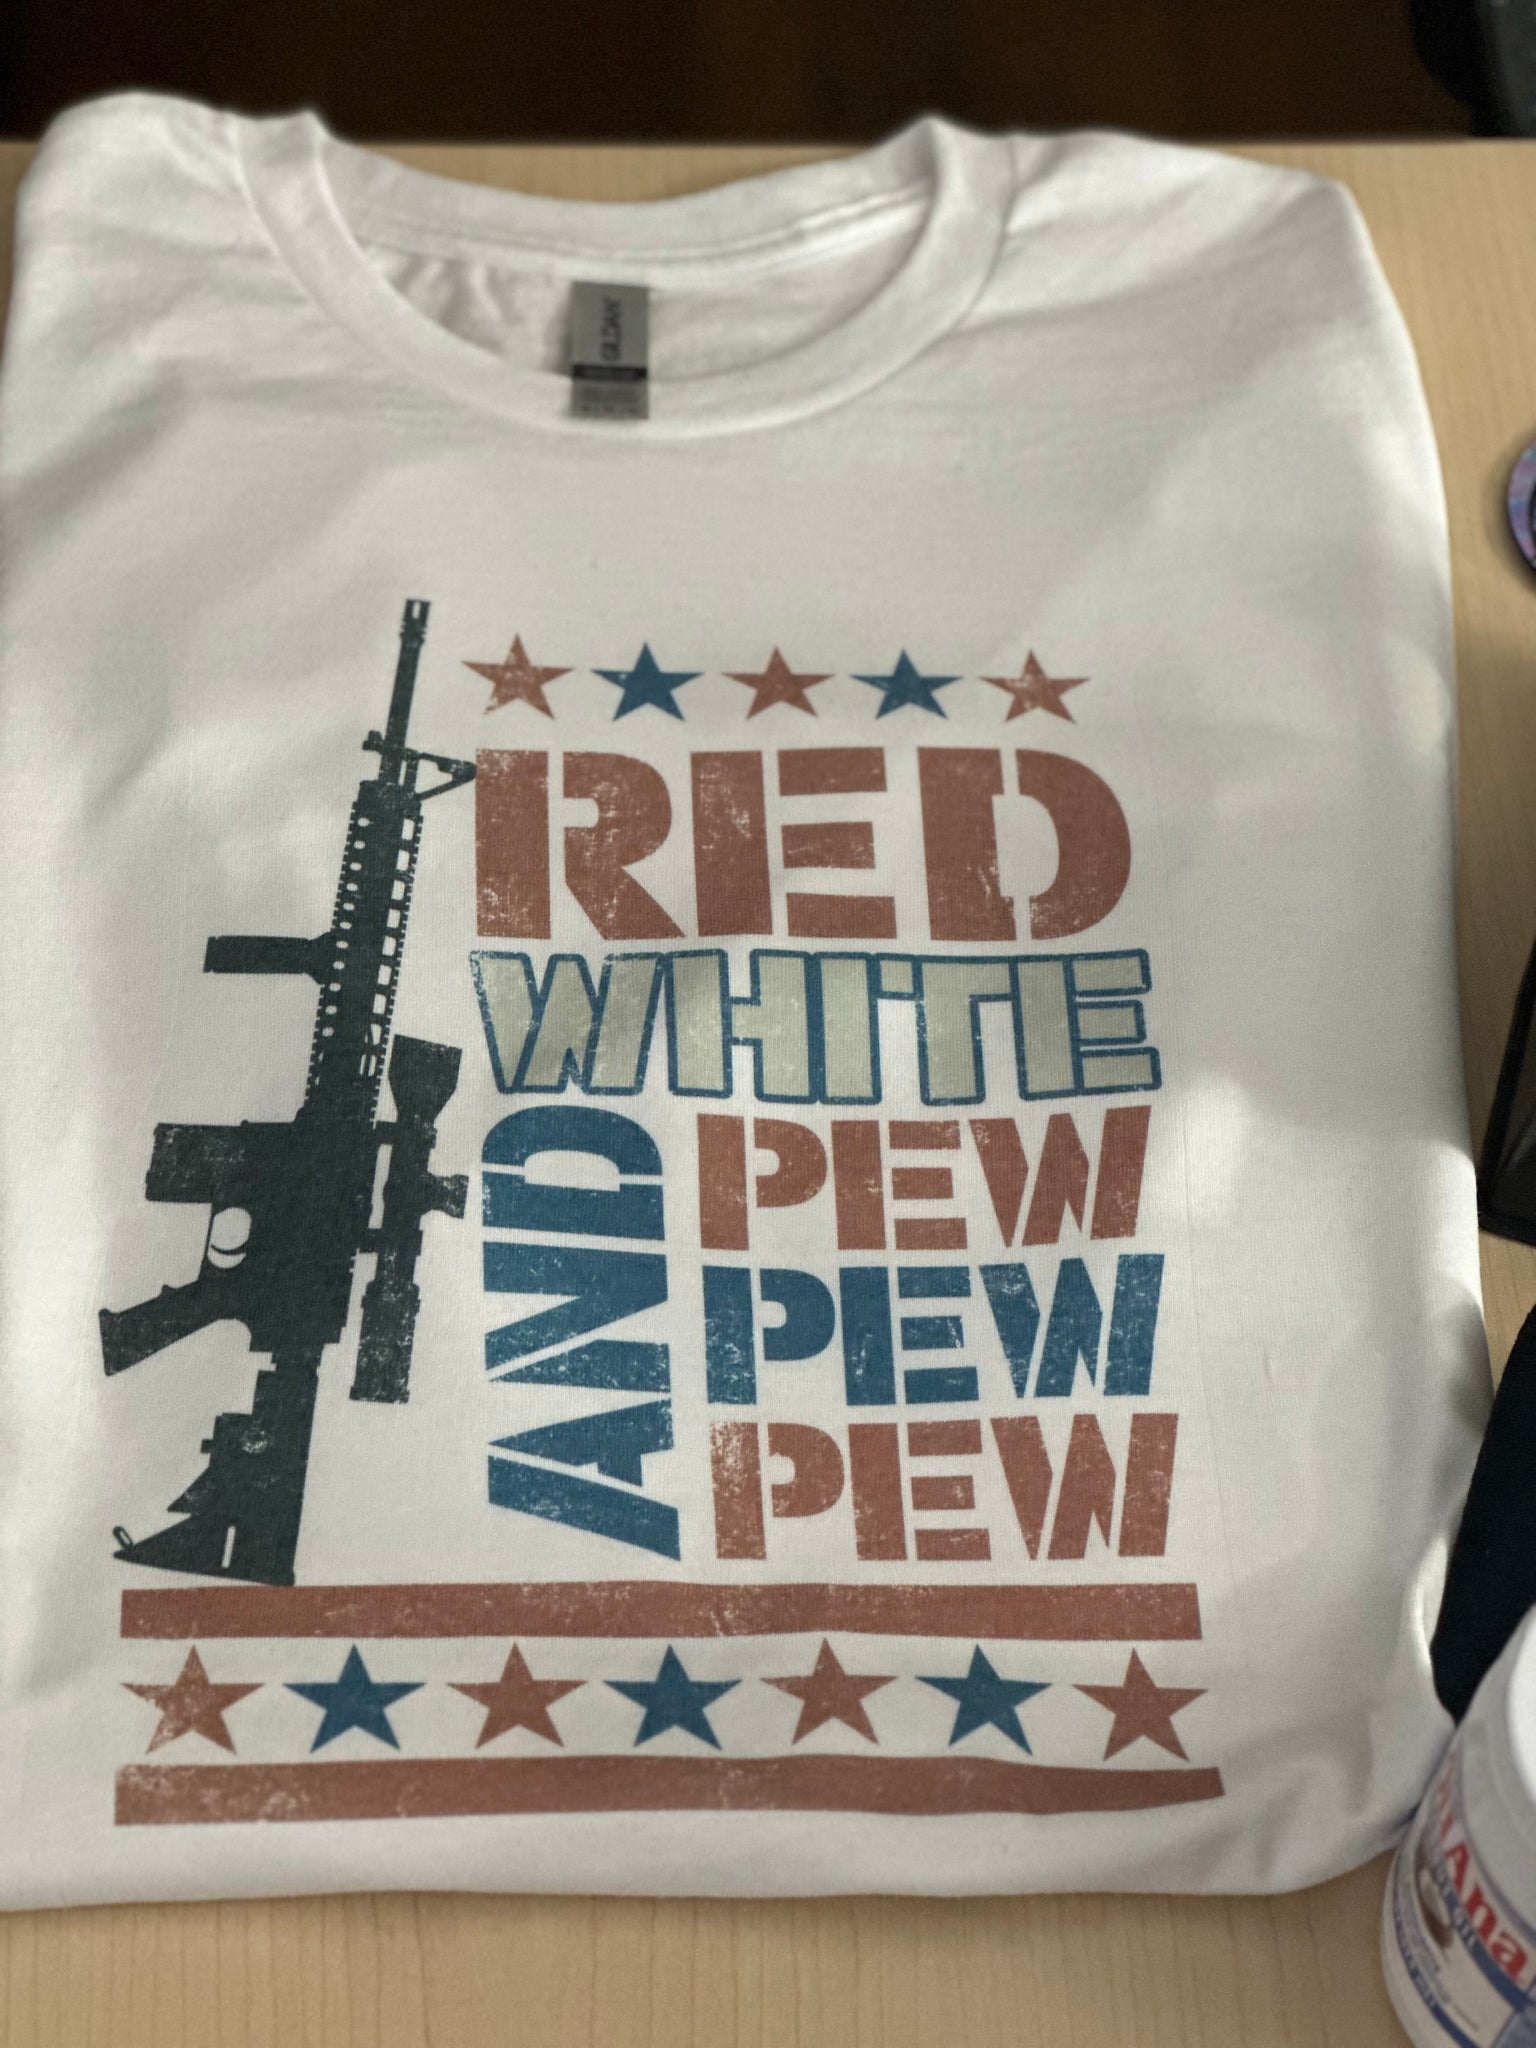 Red white & pew